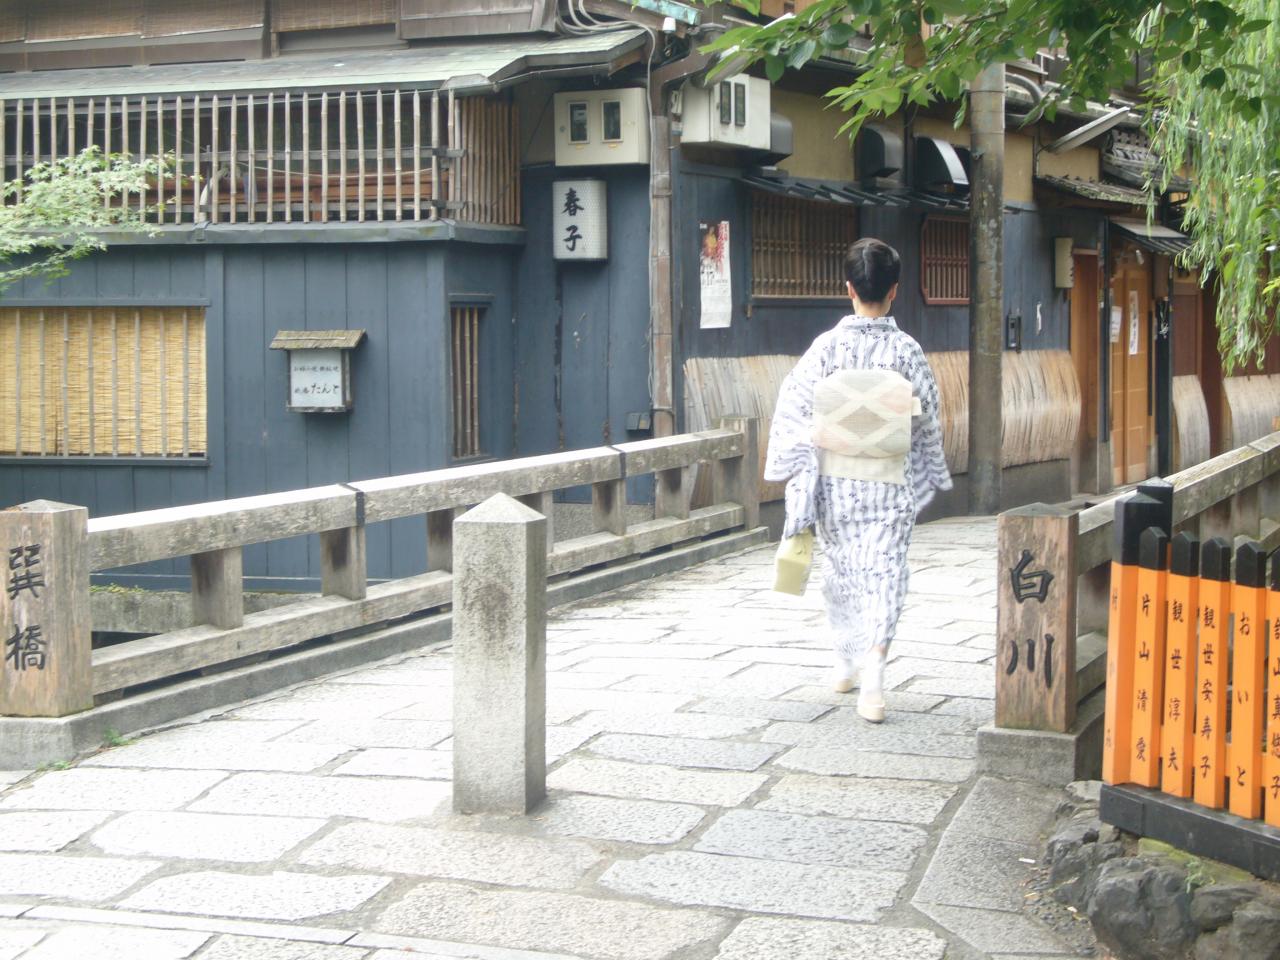 JPEG image - A geisha spotted in the Gion district of Kyoto. ...